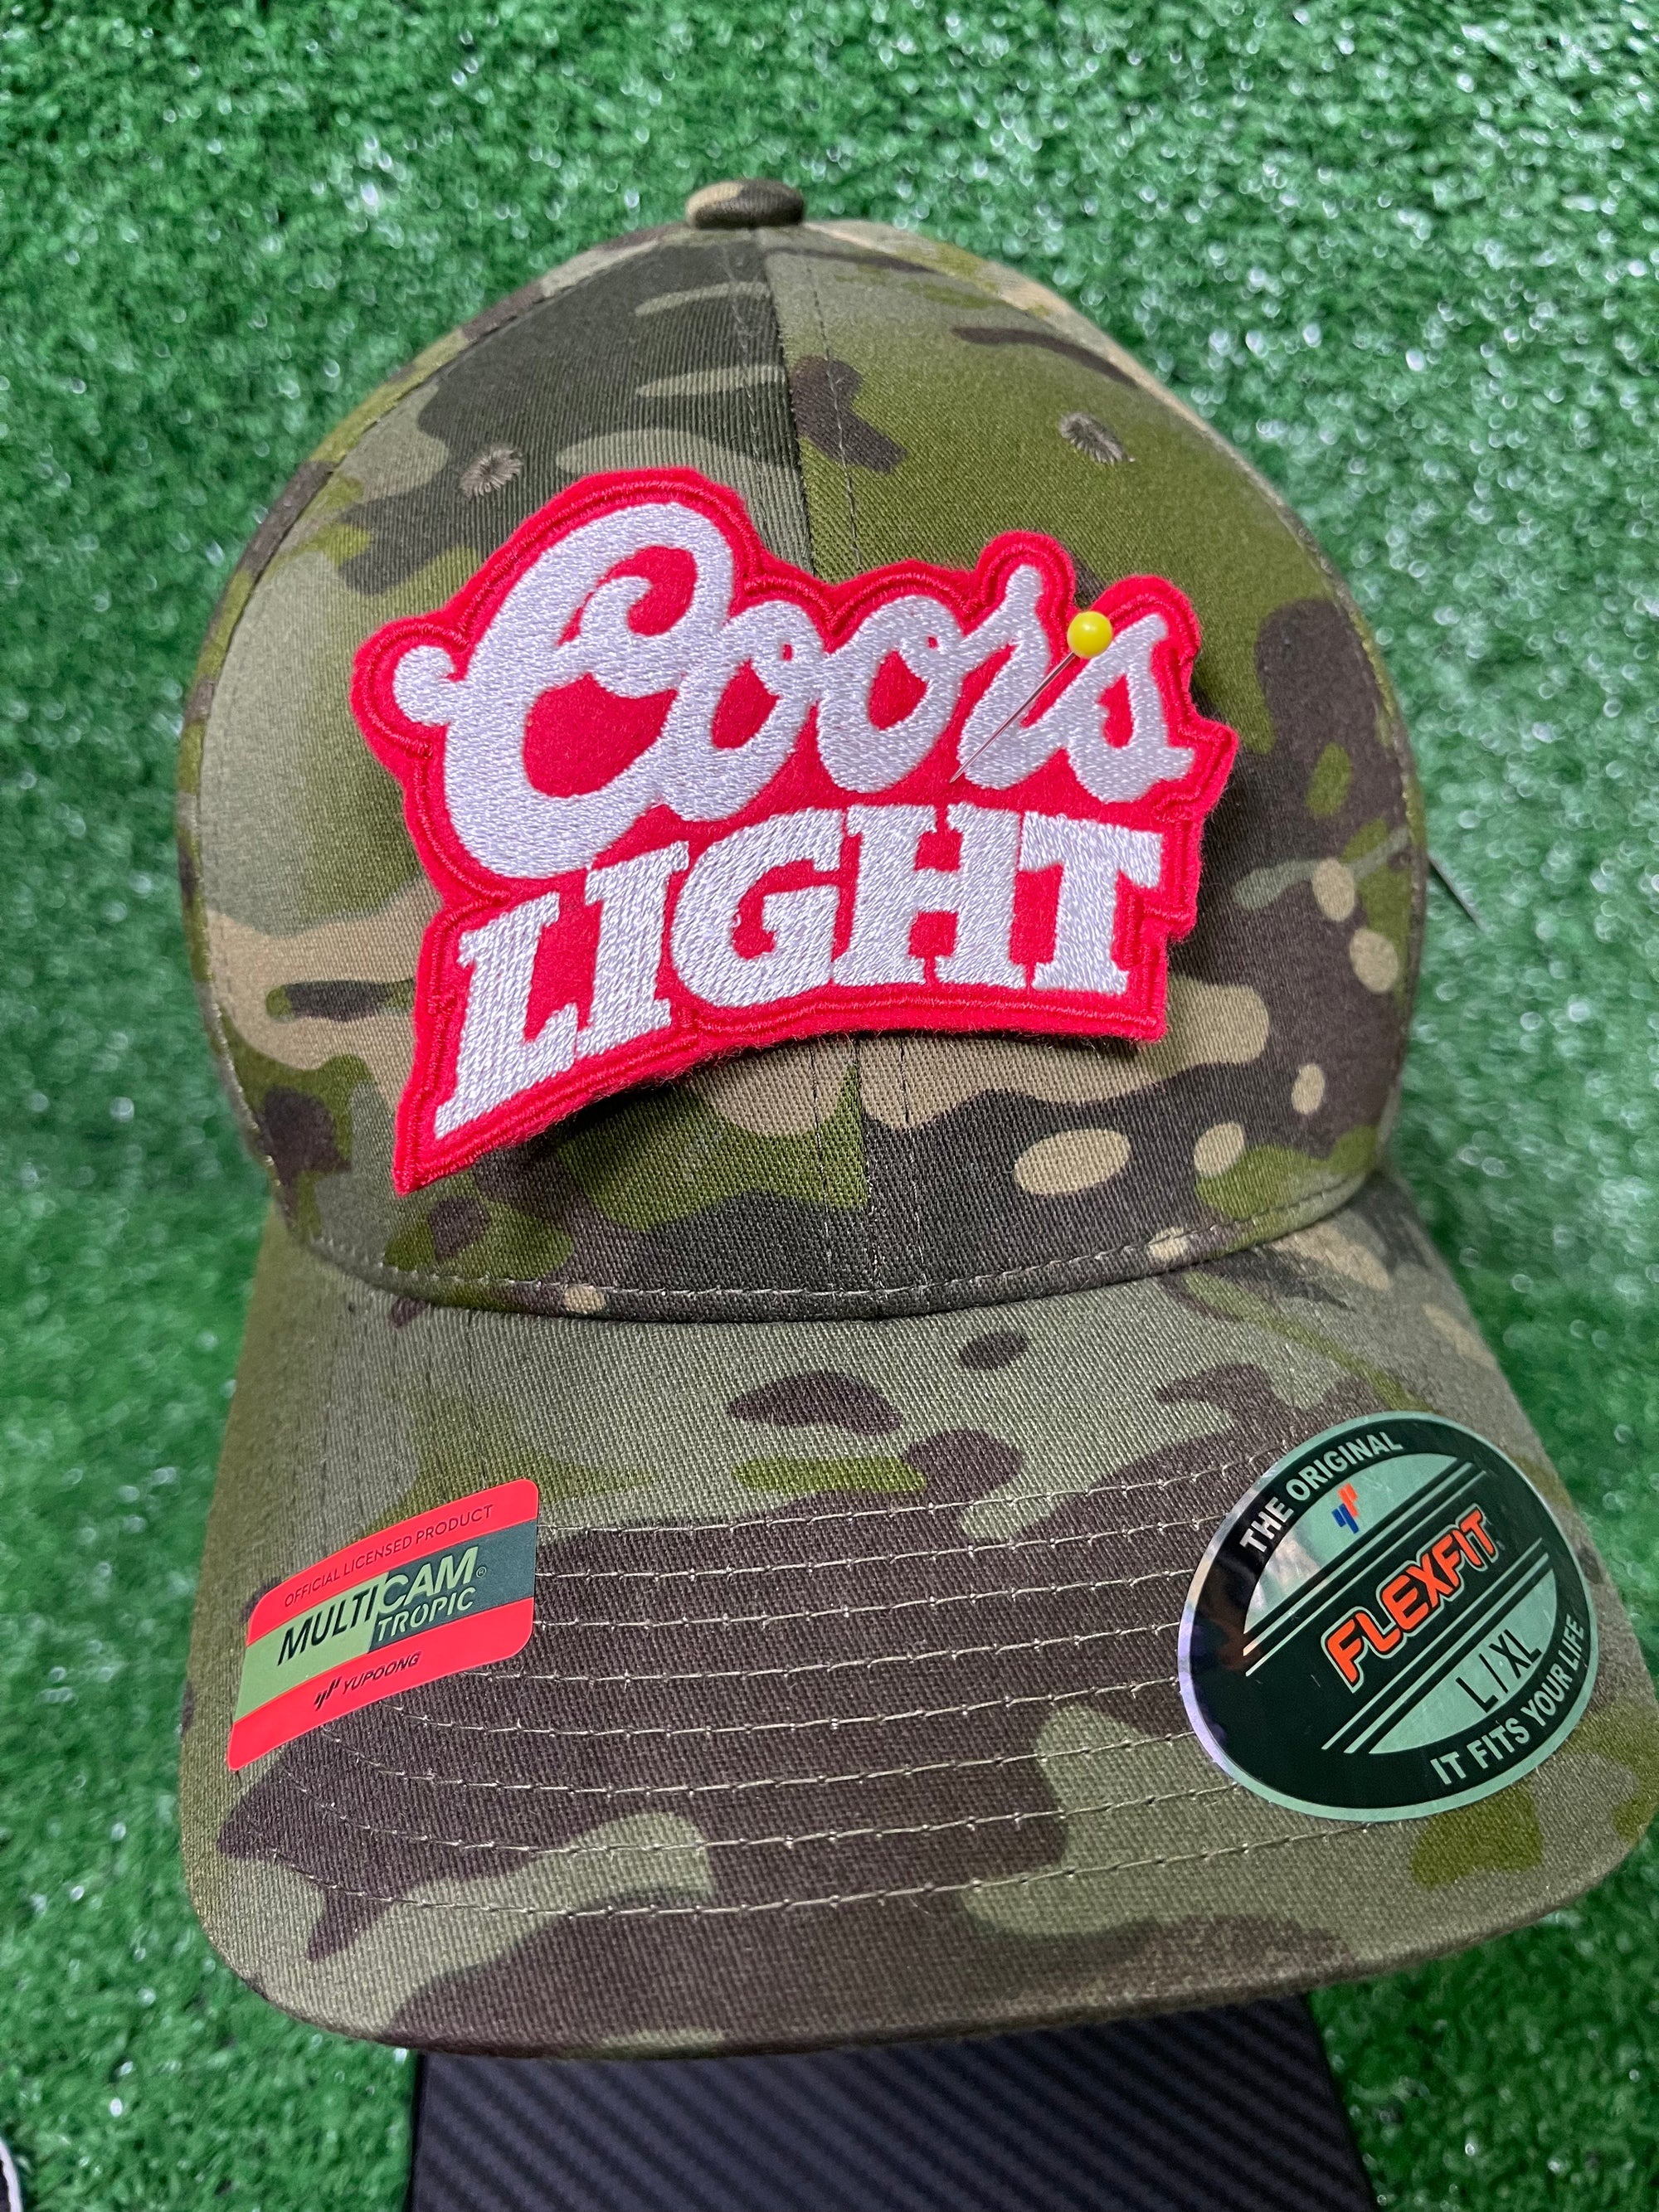 Coors Light Iron-on Patch